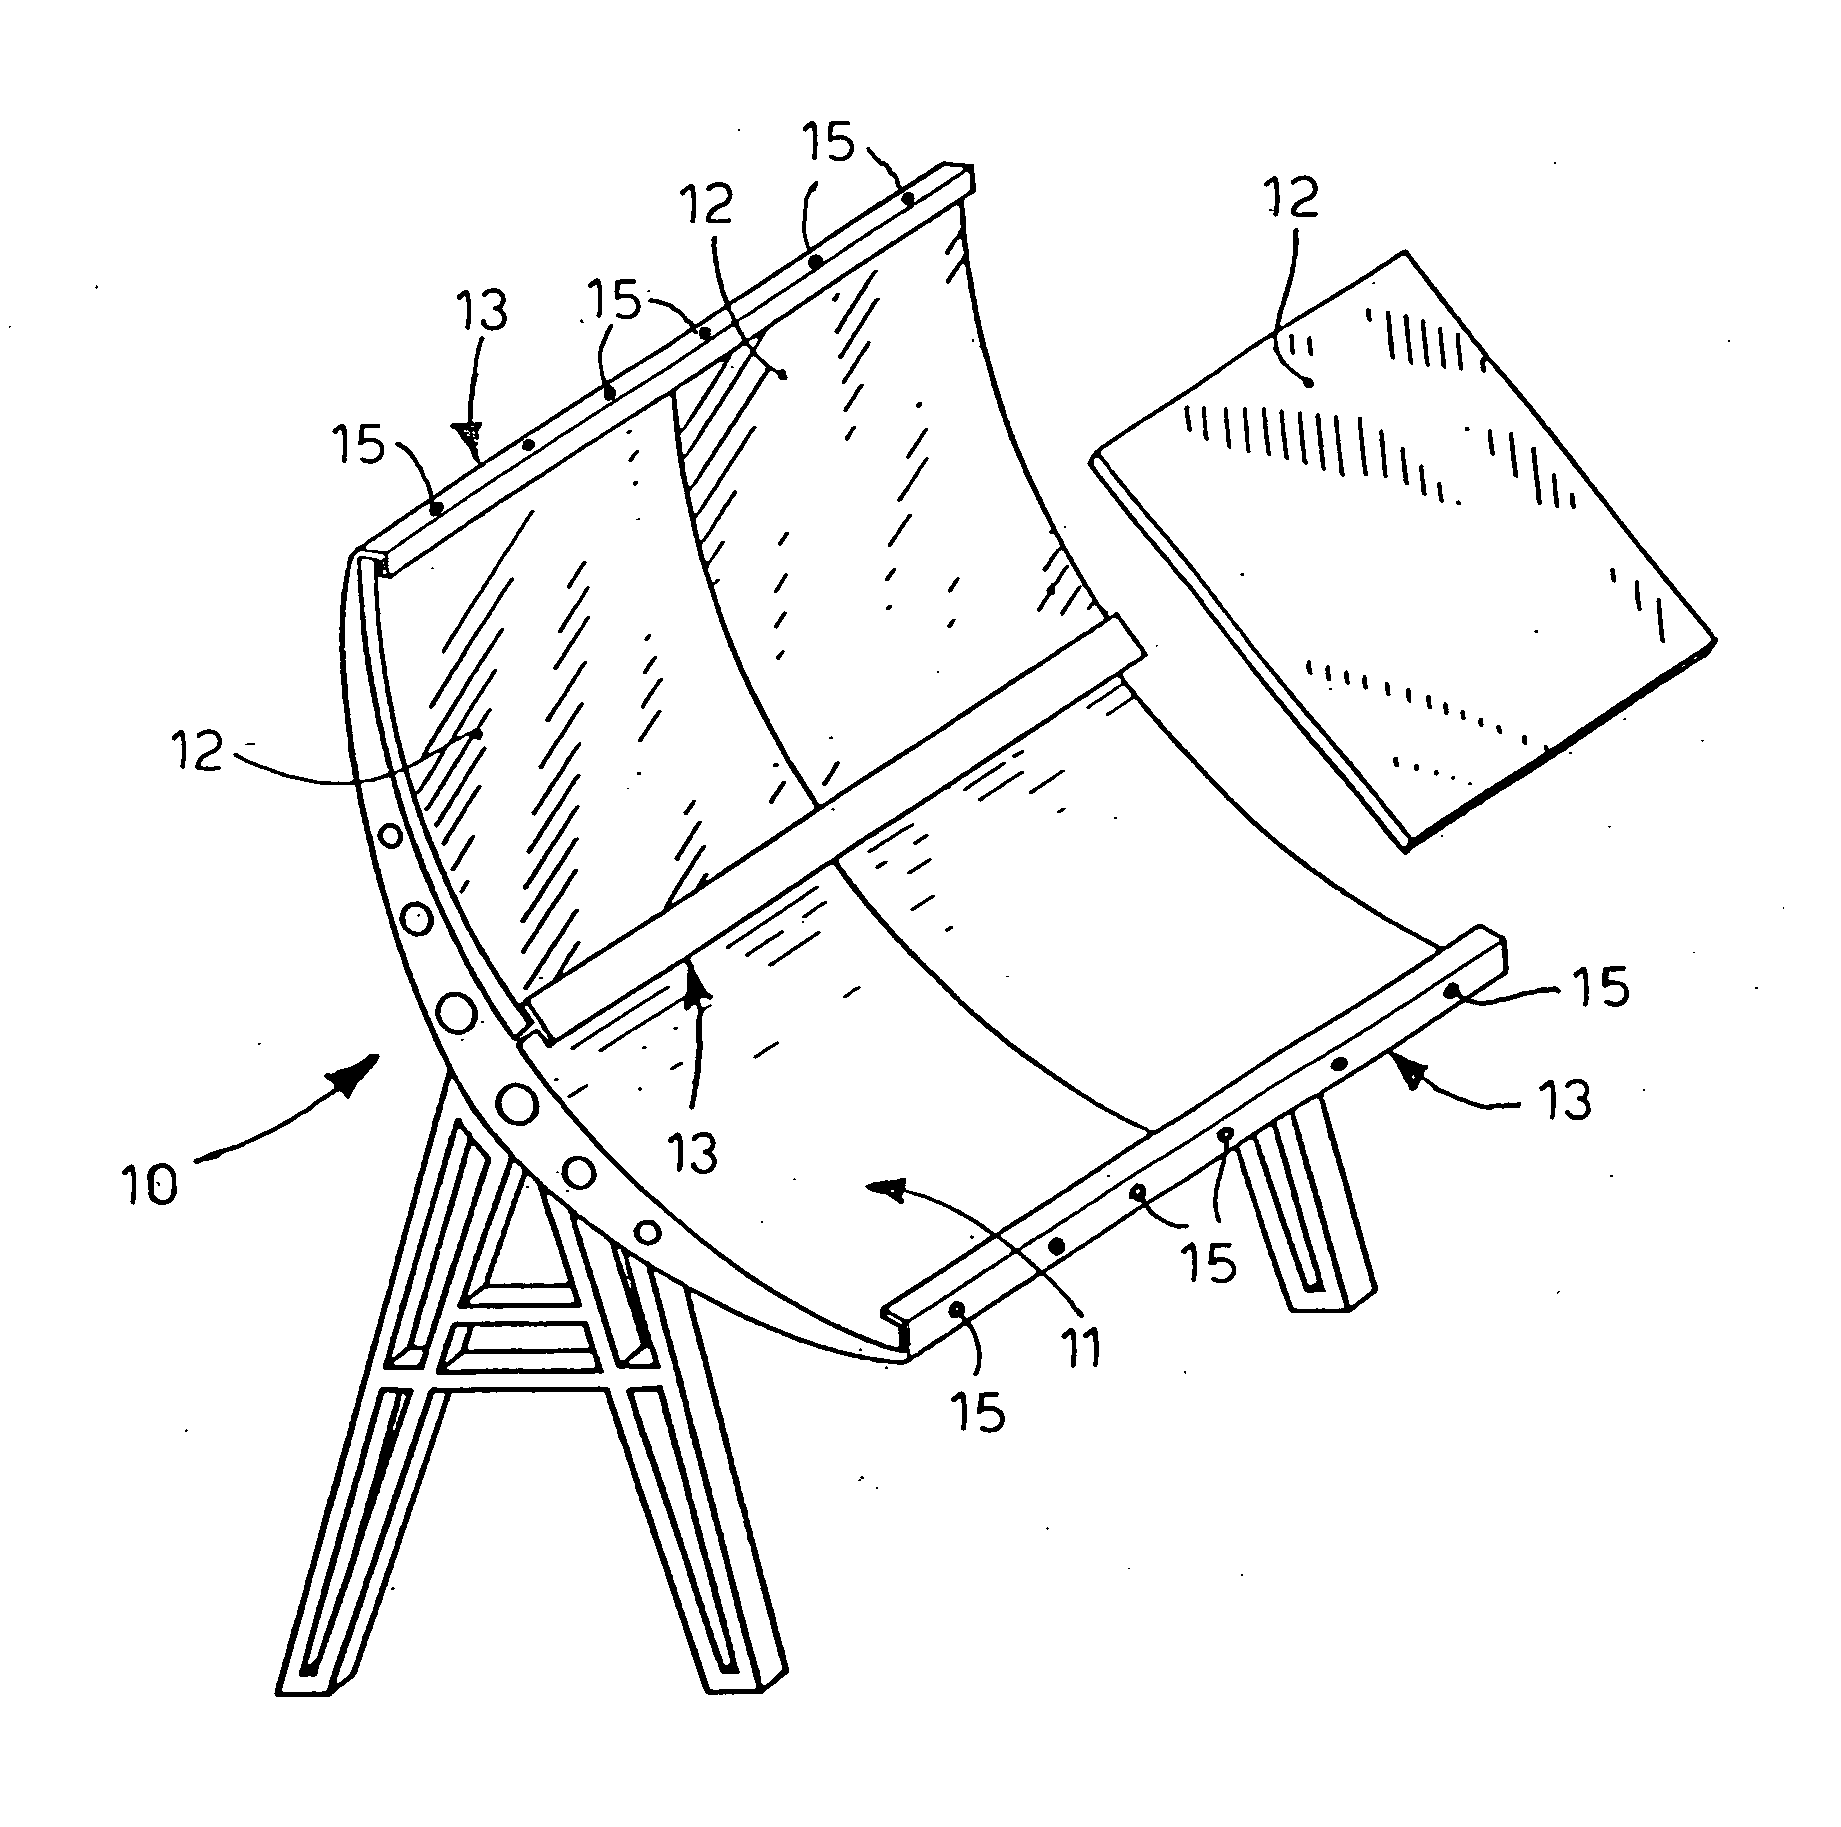 Support structure for solar plants